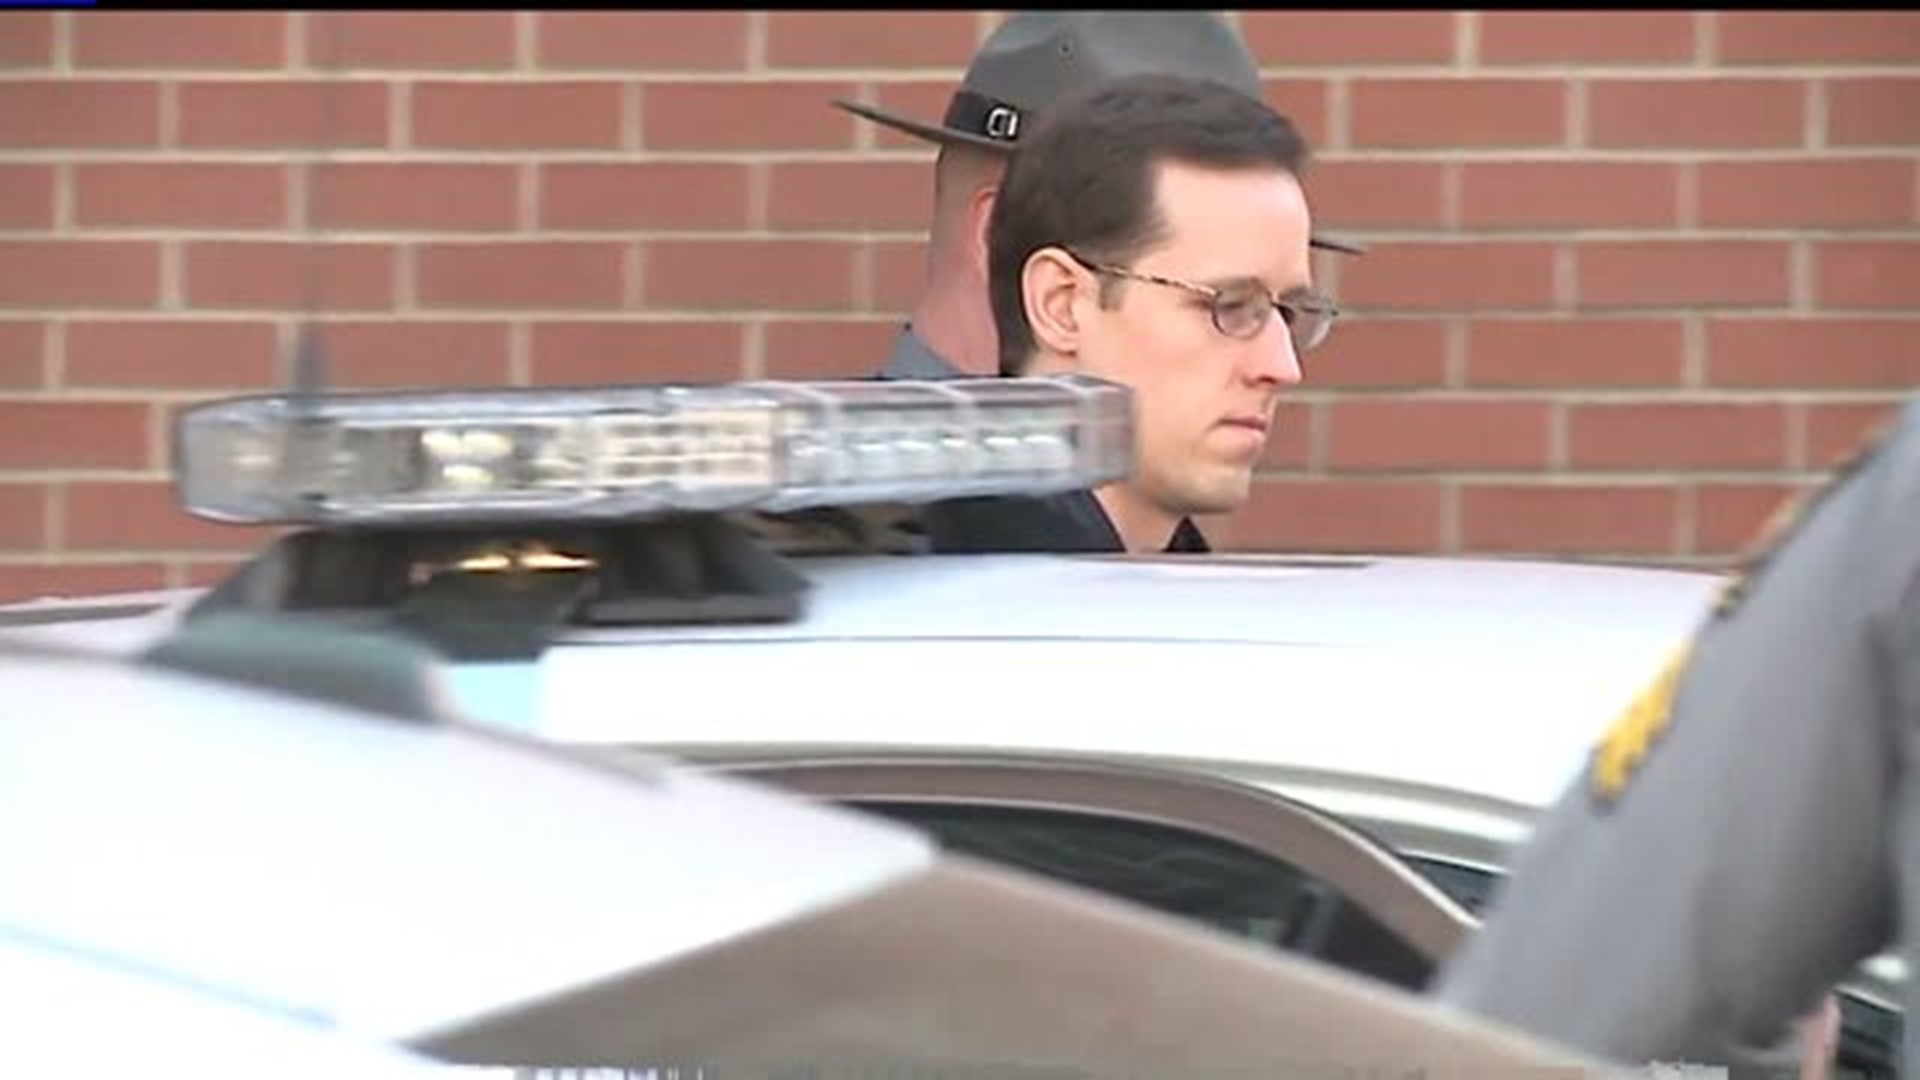 Latest on Eric Frein preliminary hearing